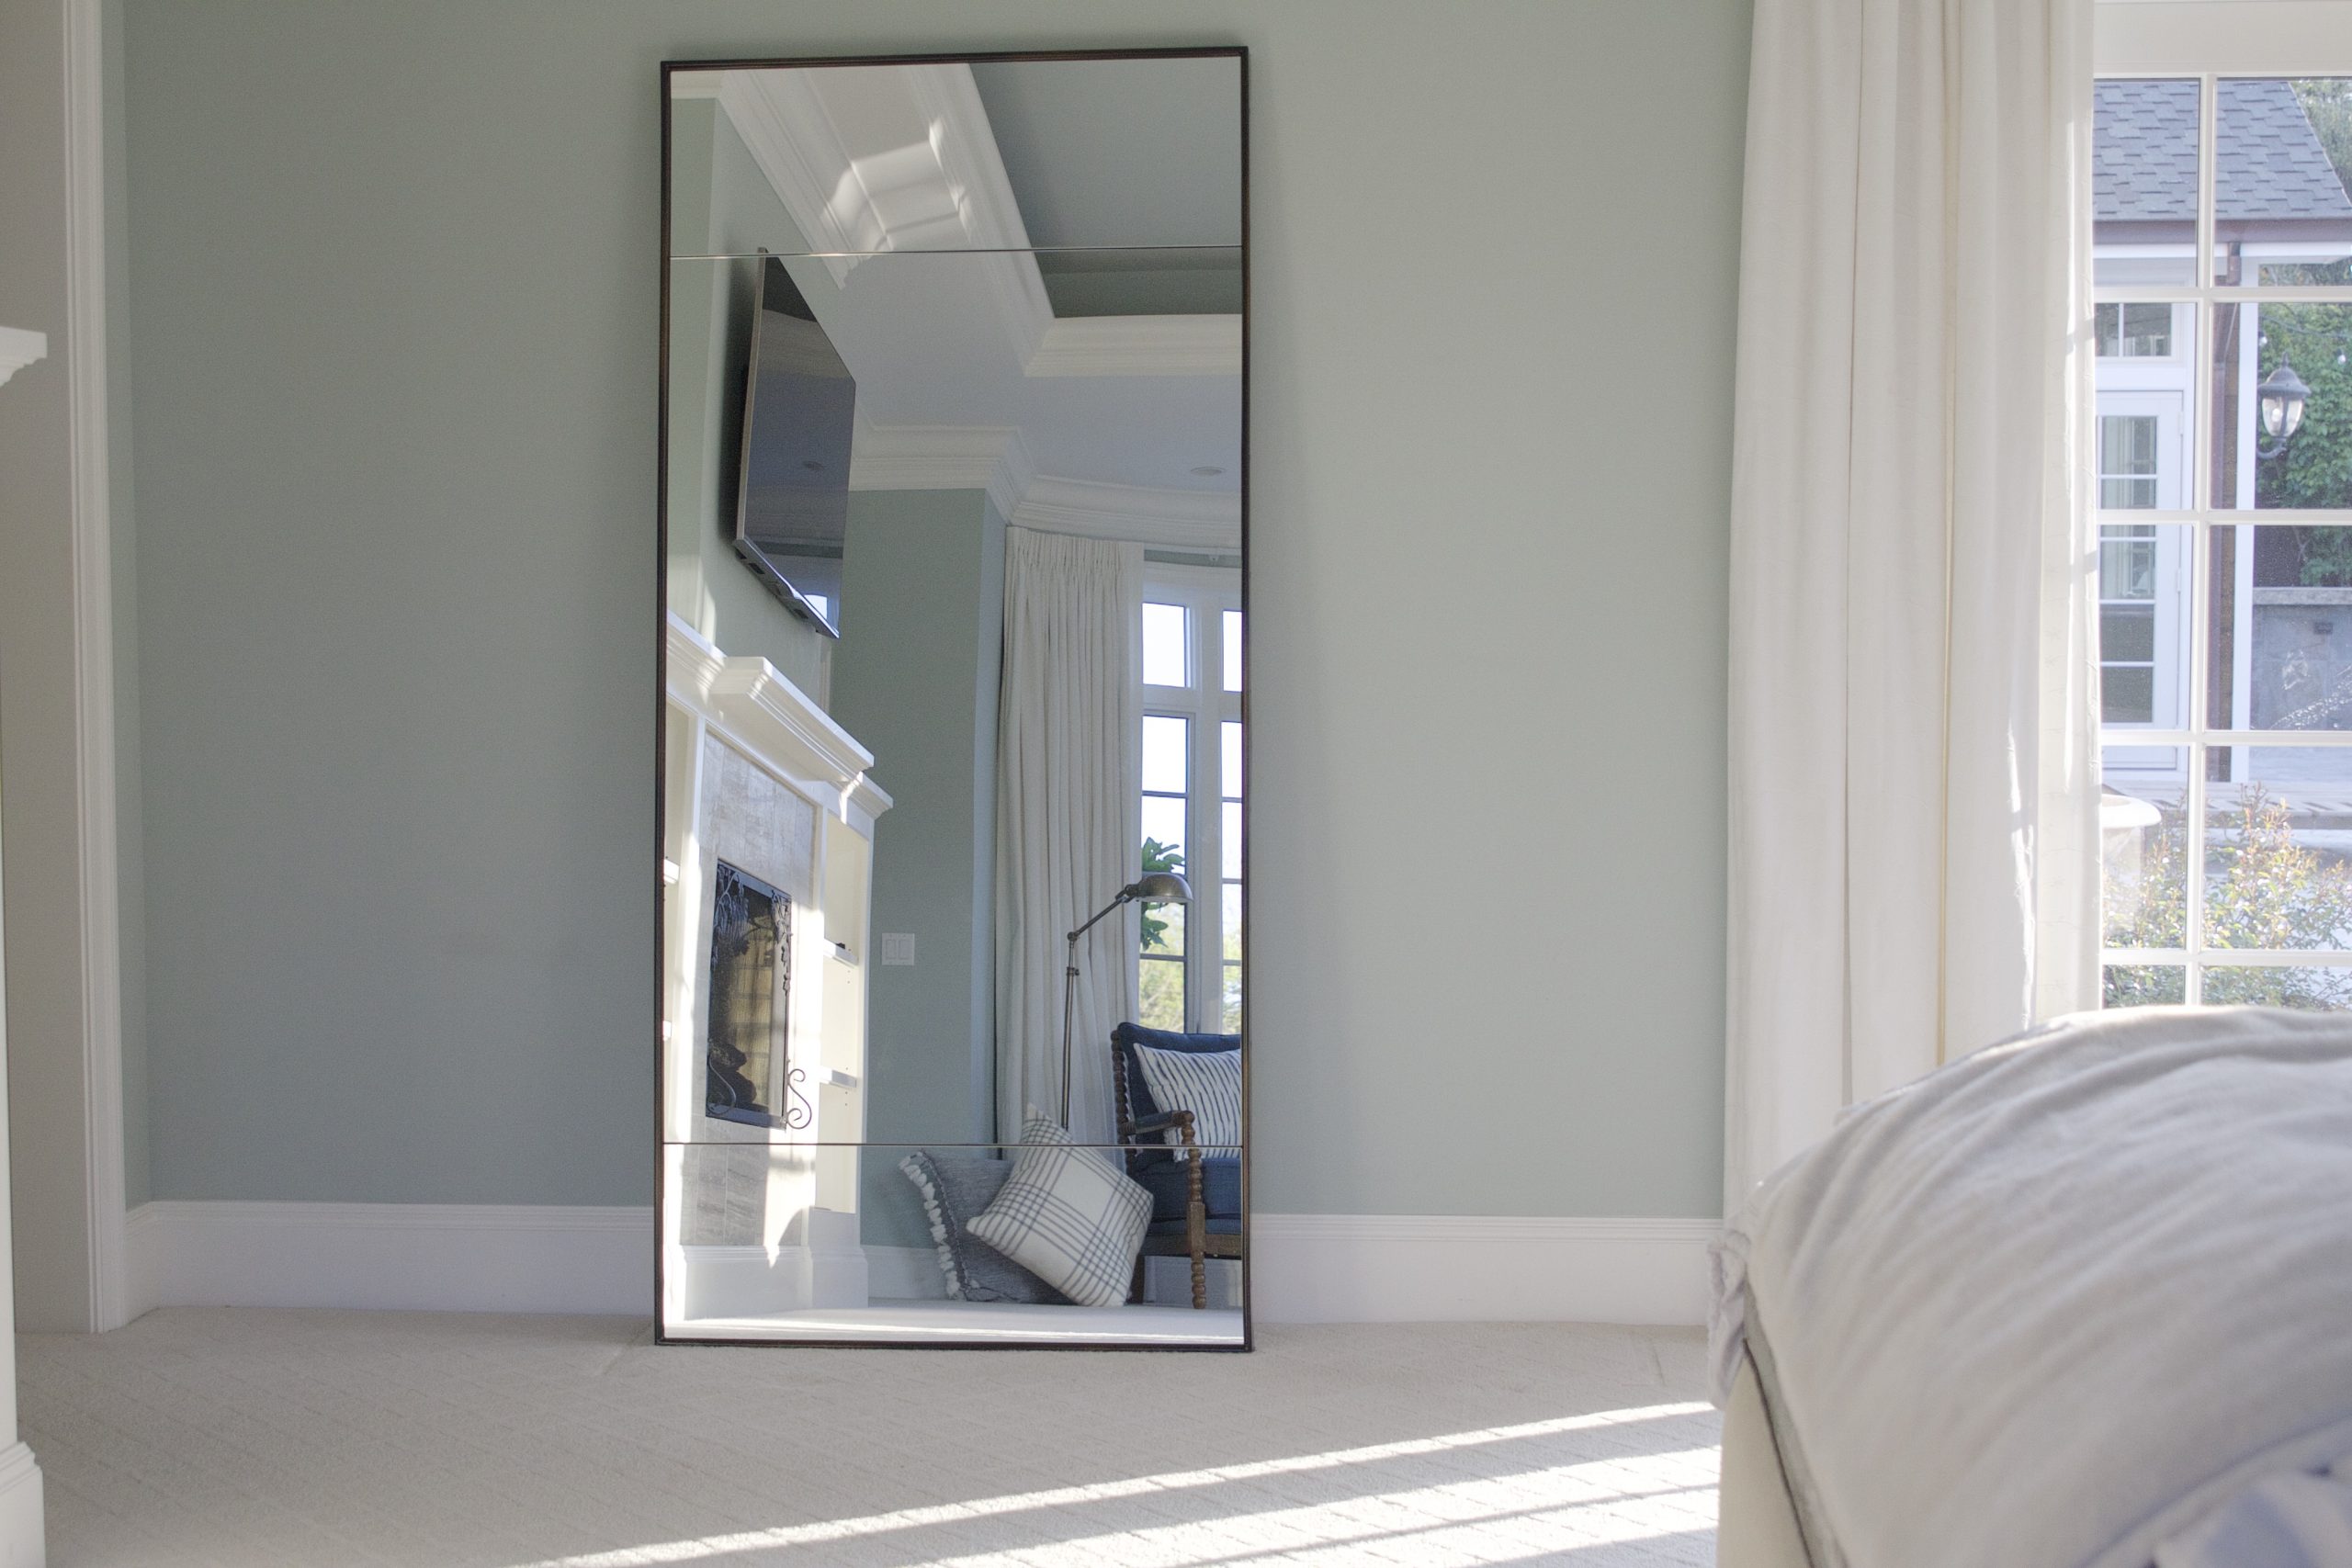 At Home Our Master Bedroom Floor Mirror Simply Organized